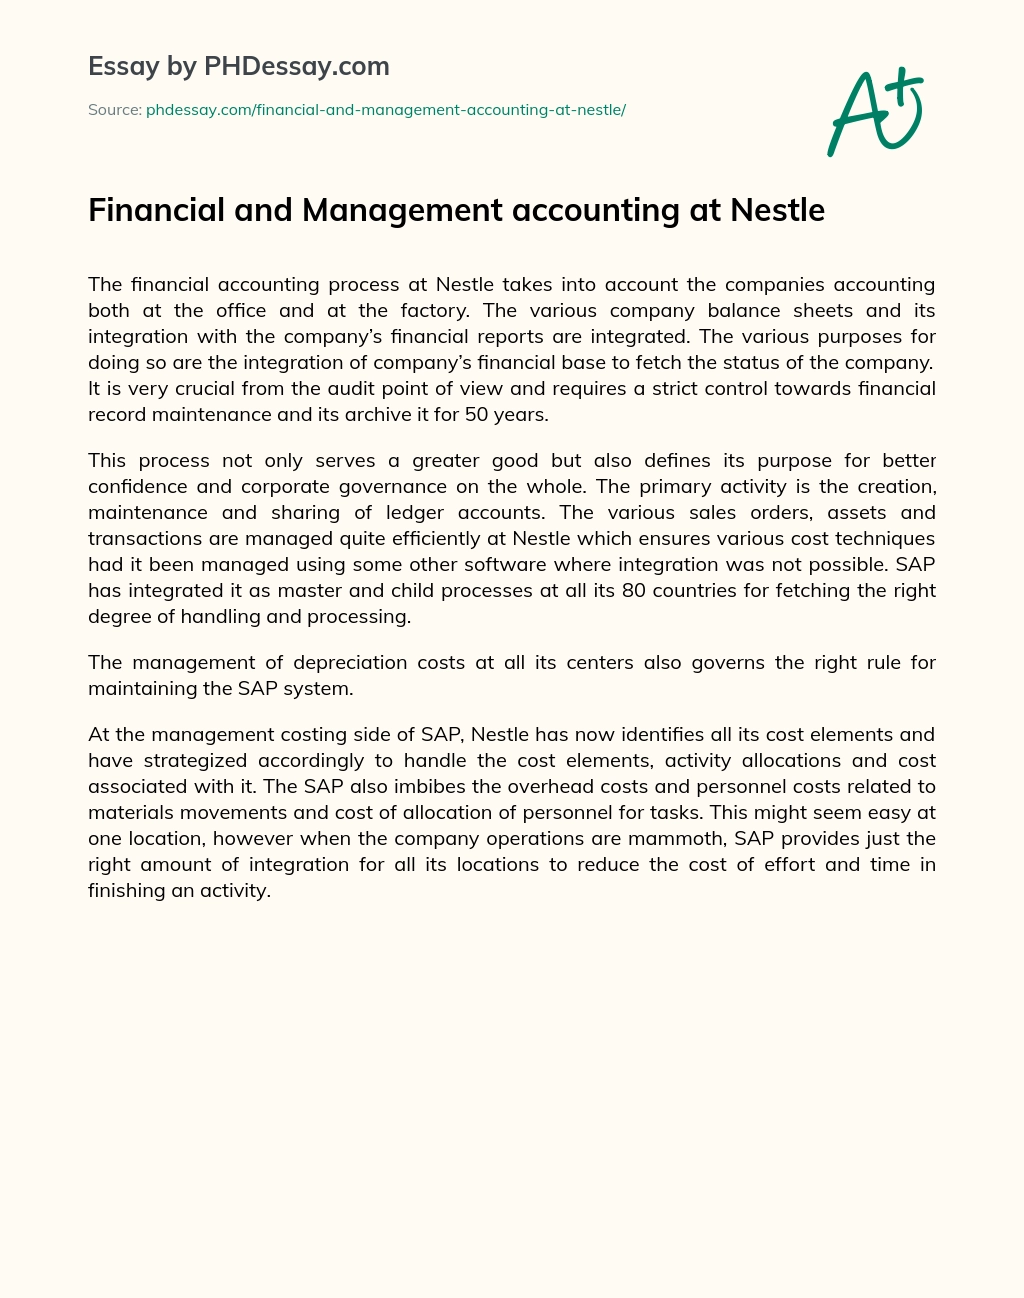 Financial and Management accounting at Nestle essay